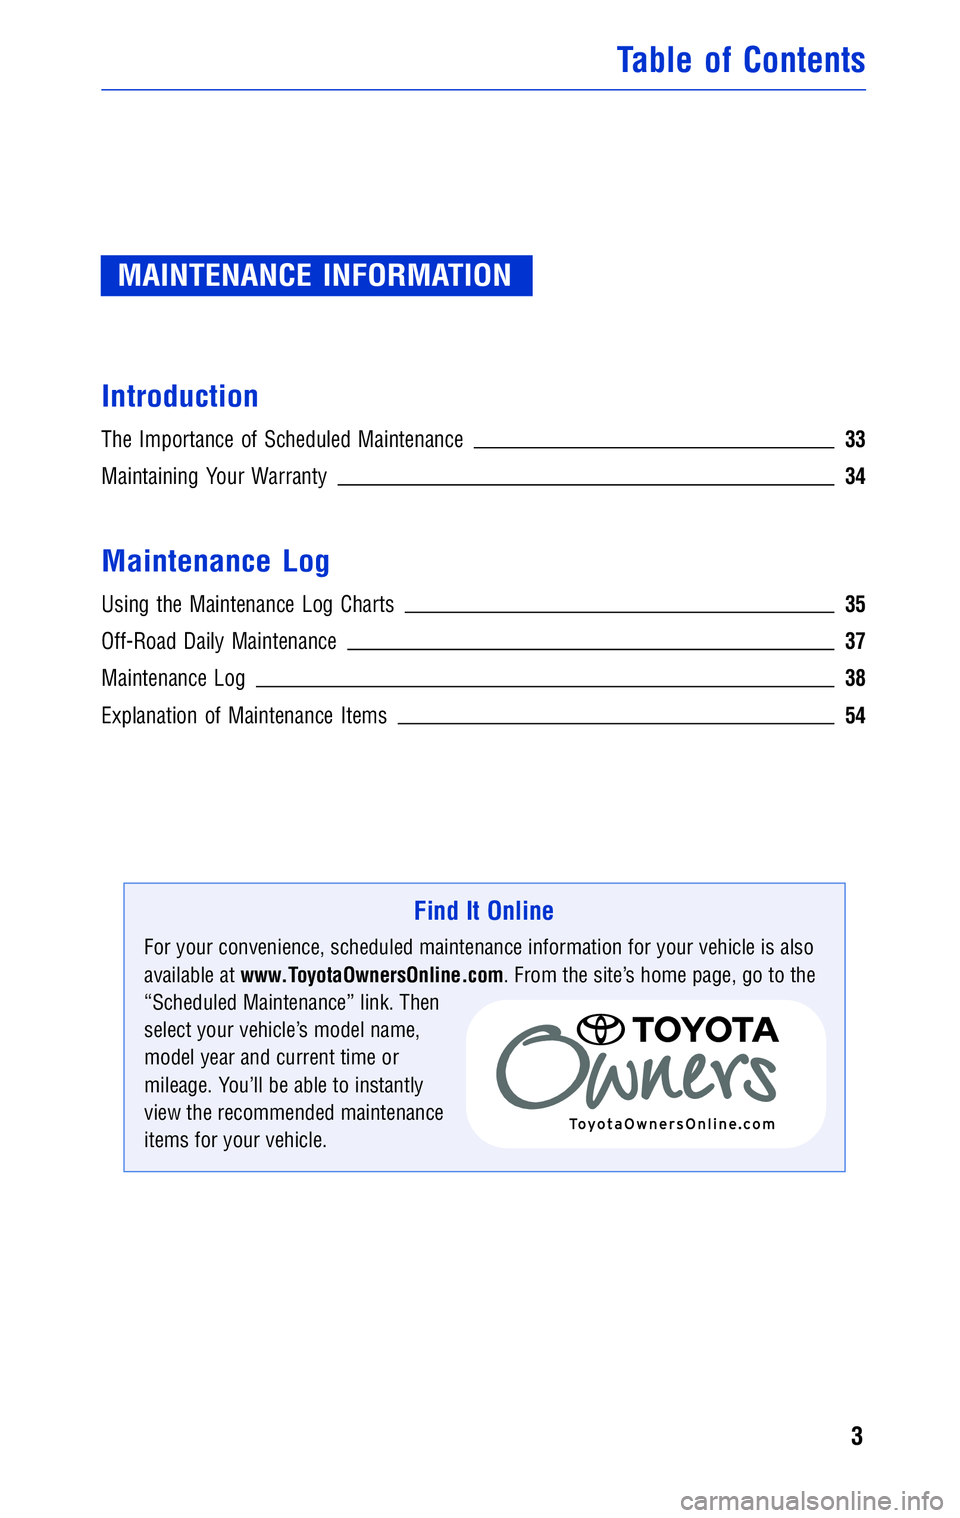 TOYOTA TACOMA 2011  Warranties & Maintenance Guides (in English) JOBNAME: 316782-2011-tac-toyw PAGE: 3 SESS: 14 OUTPUT: Wed May 19 10:51:33 2010 
/tweddle/toyota/sched-maint/316782-en-tac/wg
MAINTENANCE INFORMATION
Introduction
The Importance of Scheduled Maintenan